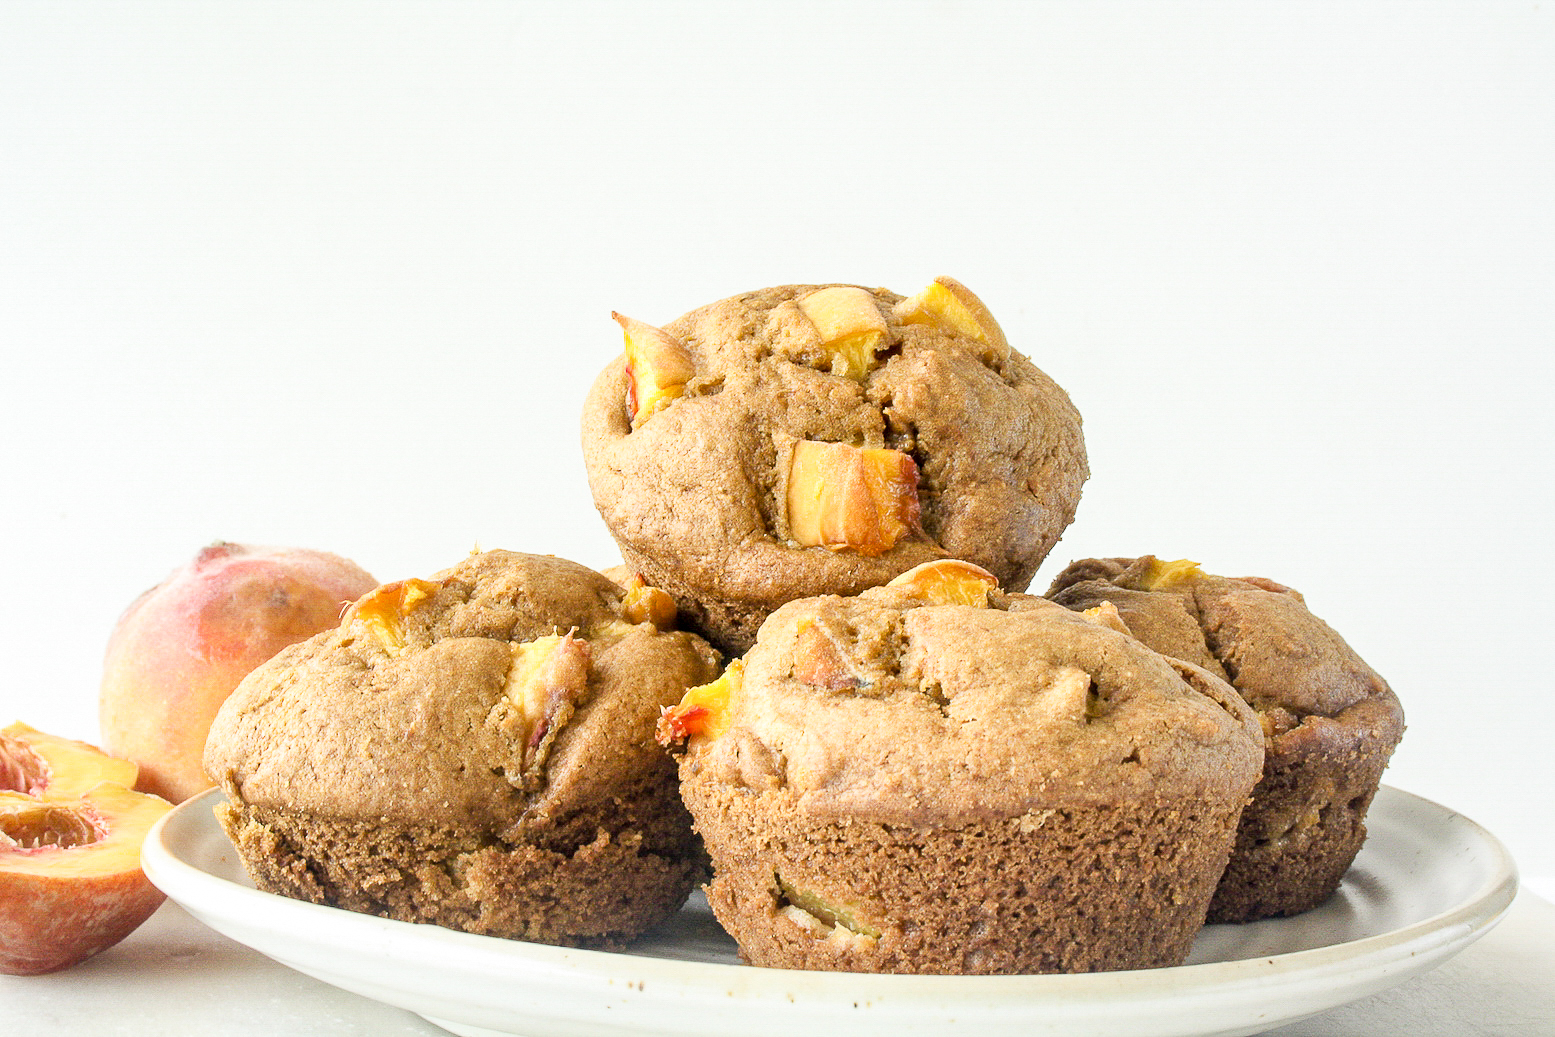 Tender brown sugar muffins made with cornmeal and fresh peaches!